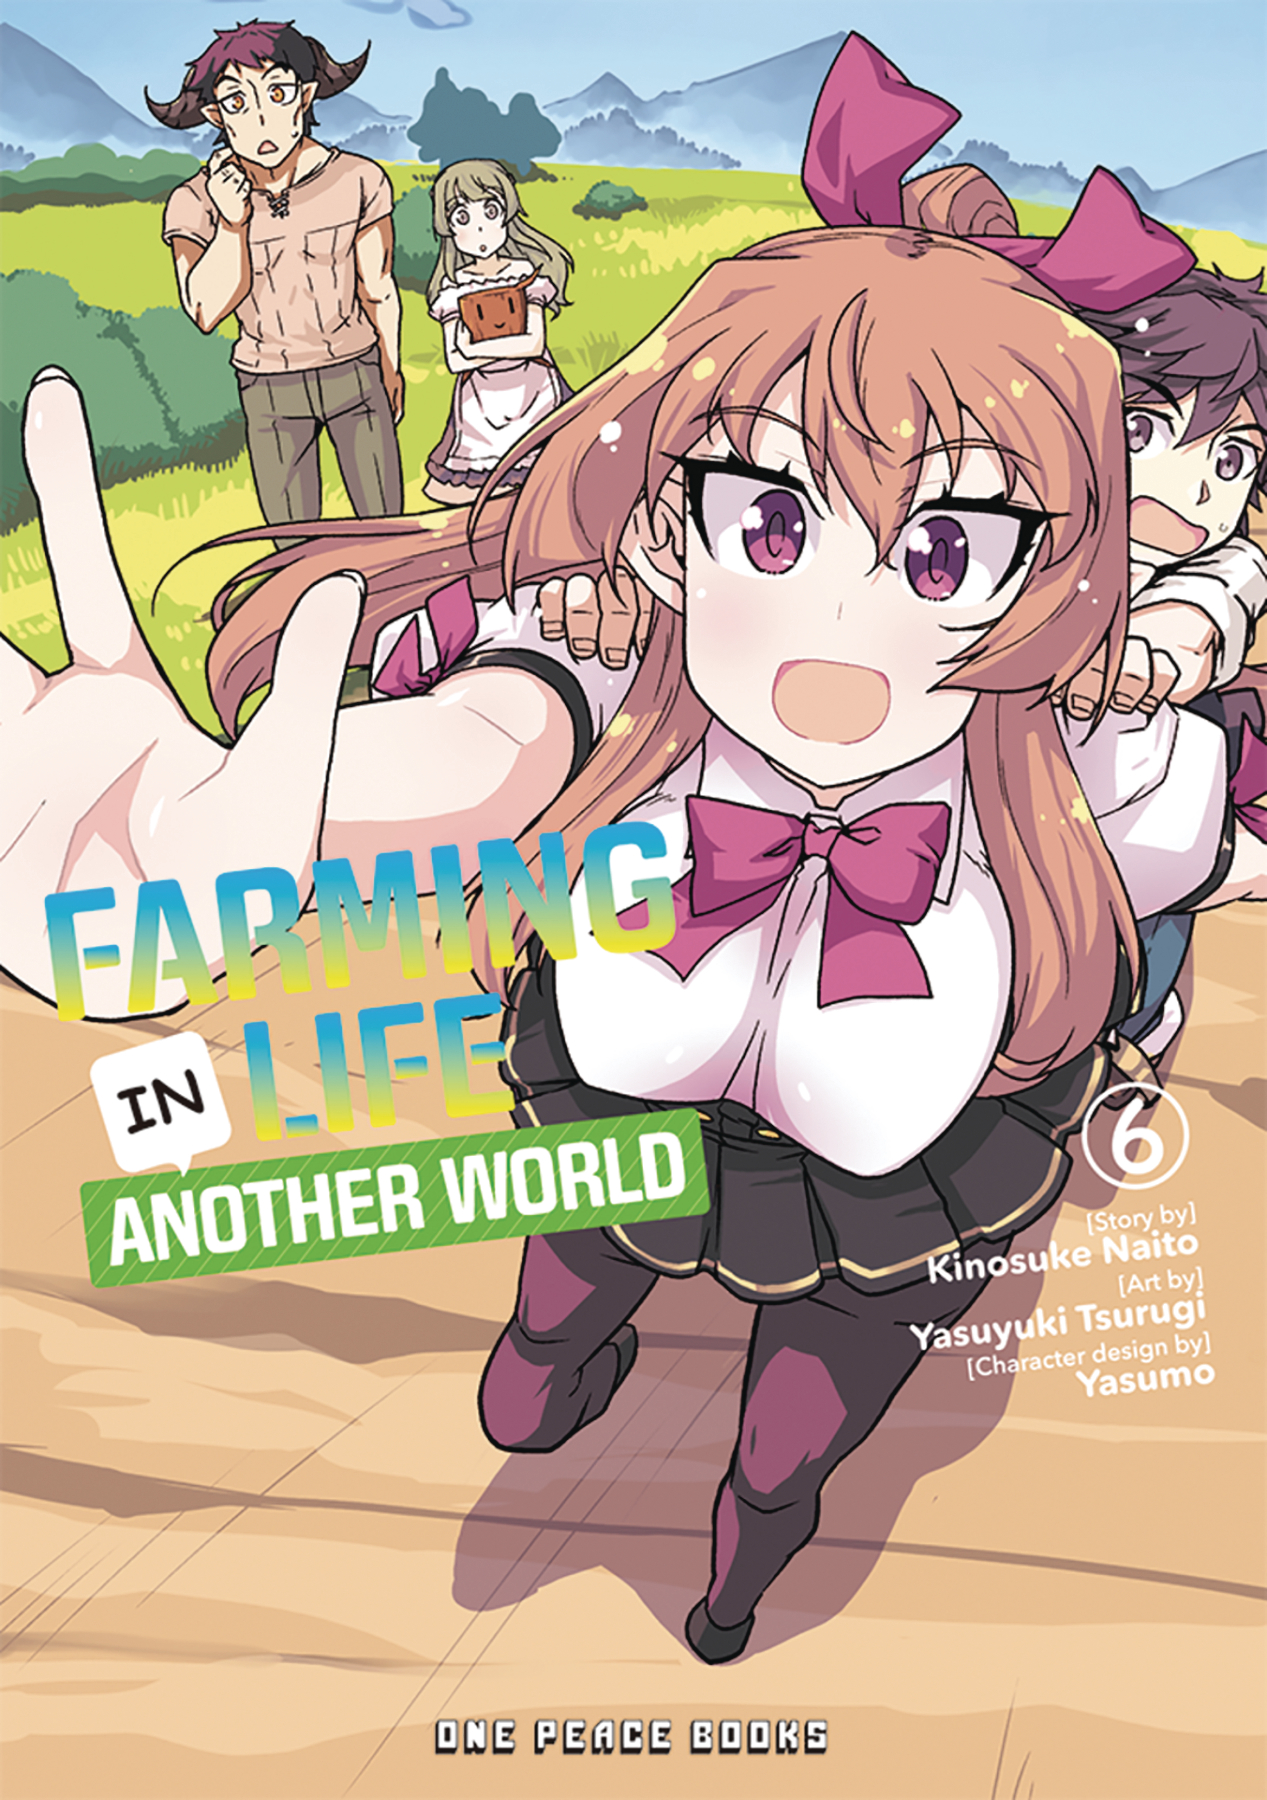 Farming Life in Another World, Official Trailer